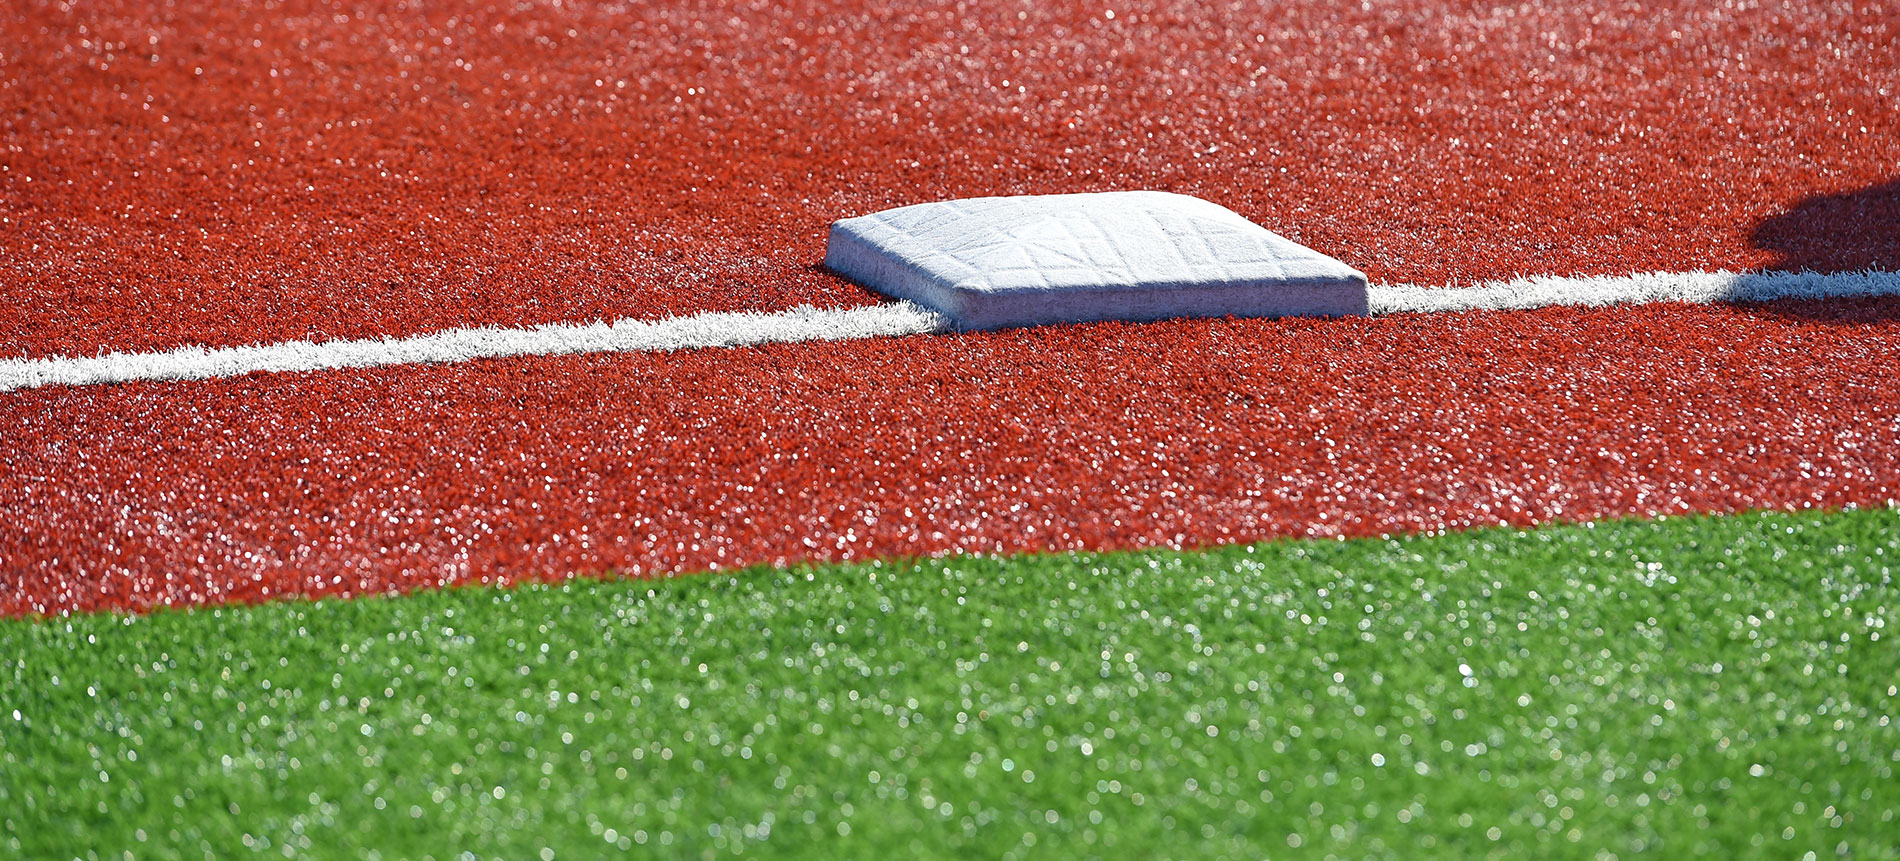 Today’s Home Doubleheader Postponed Due to Weather